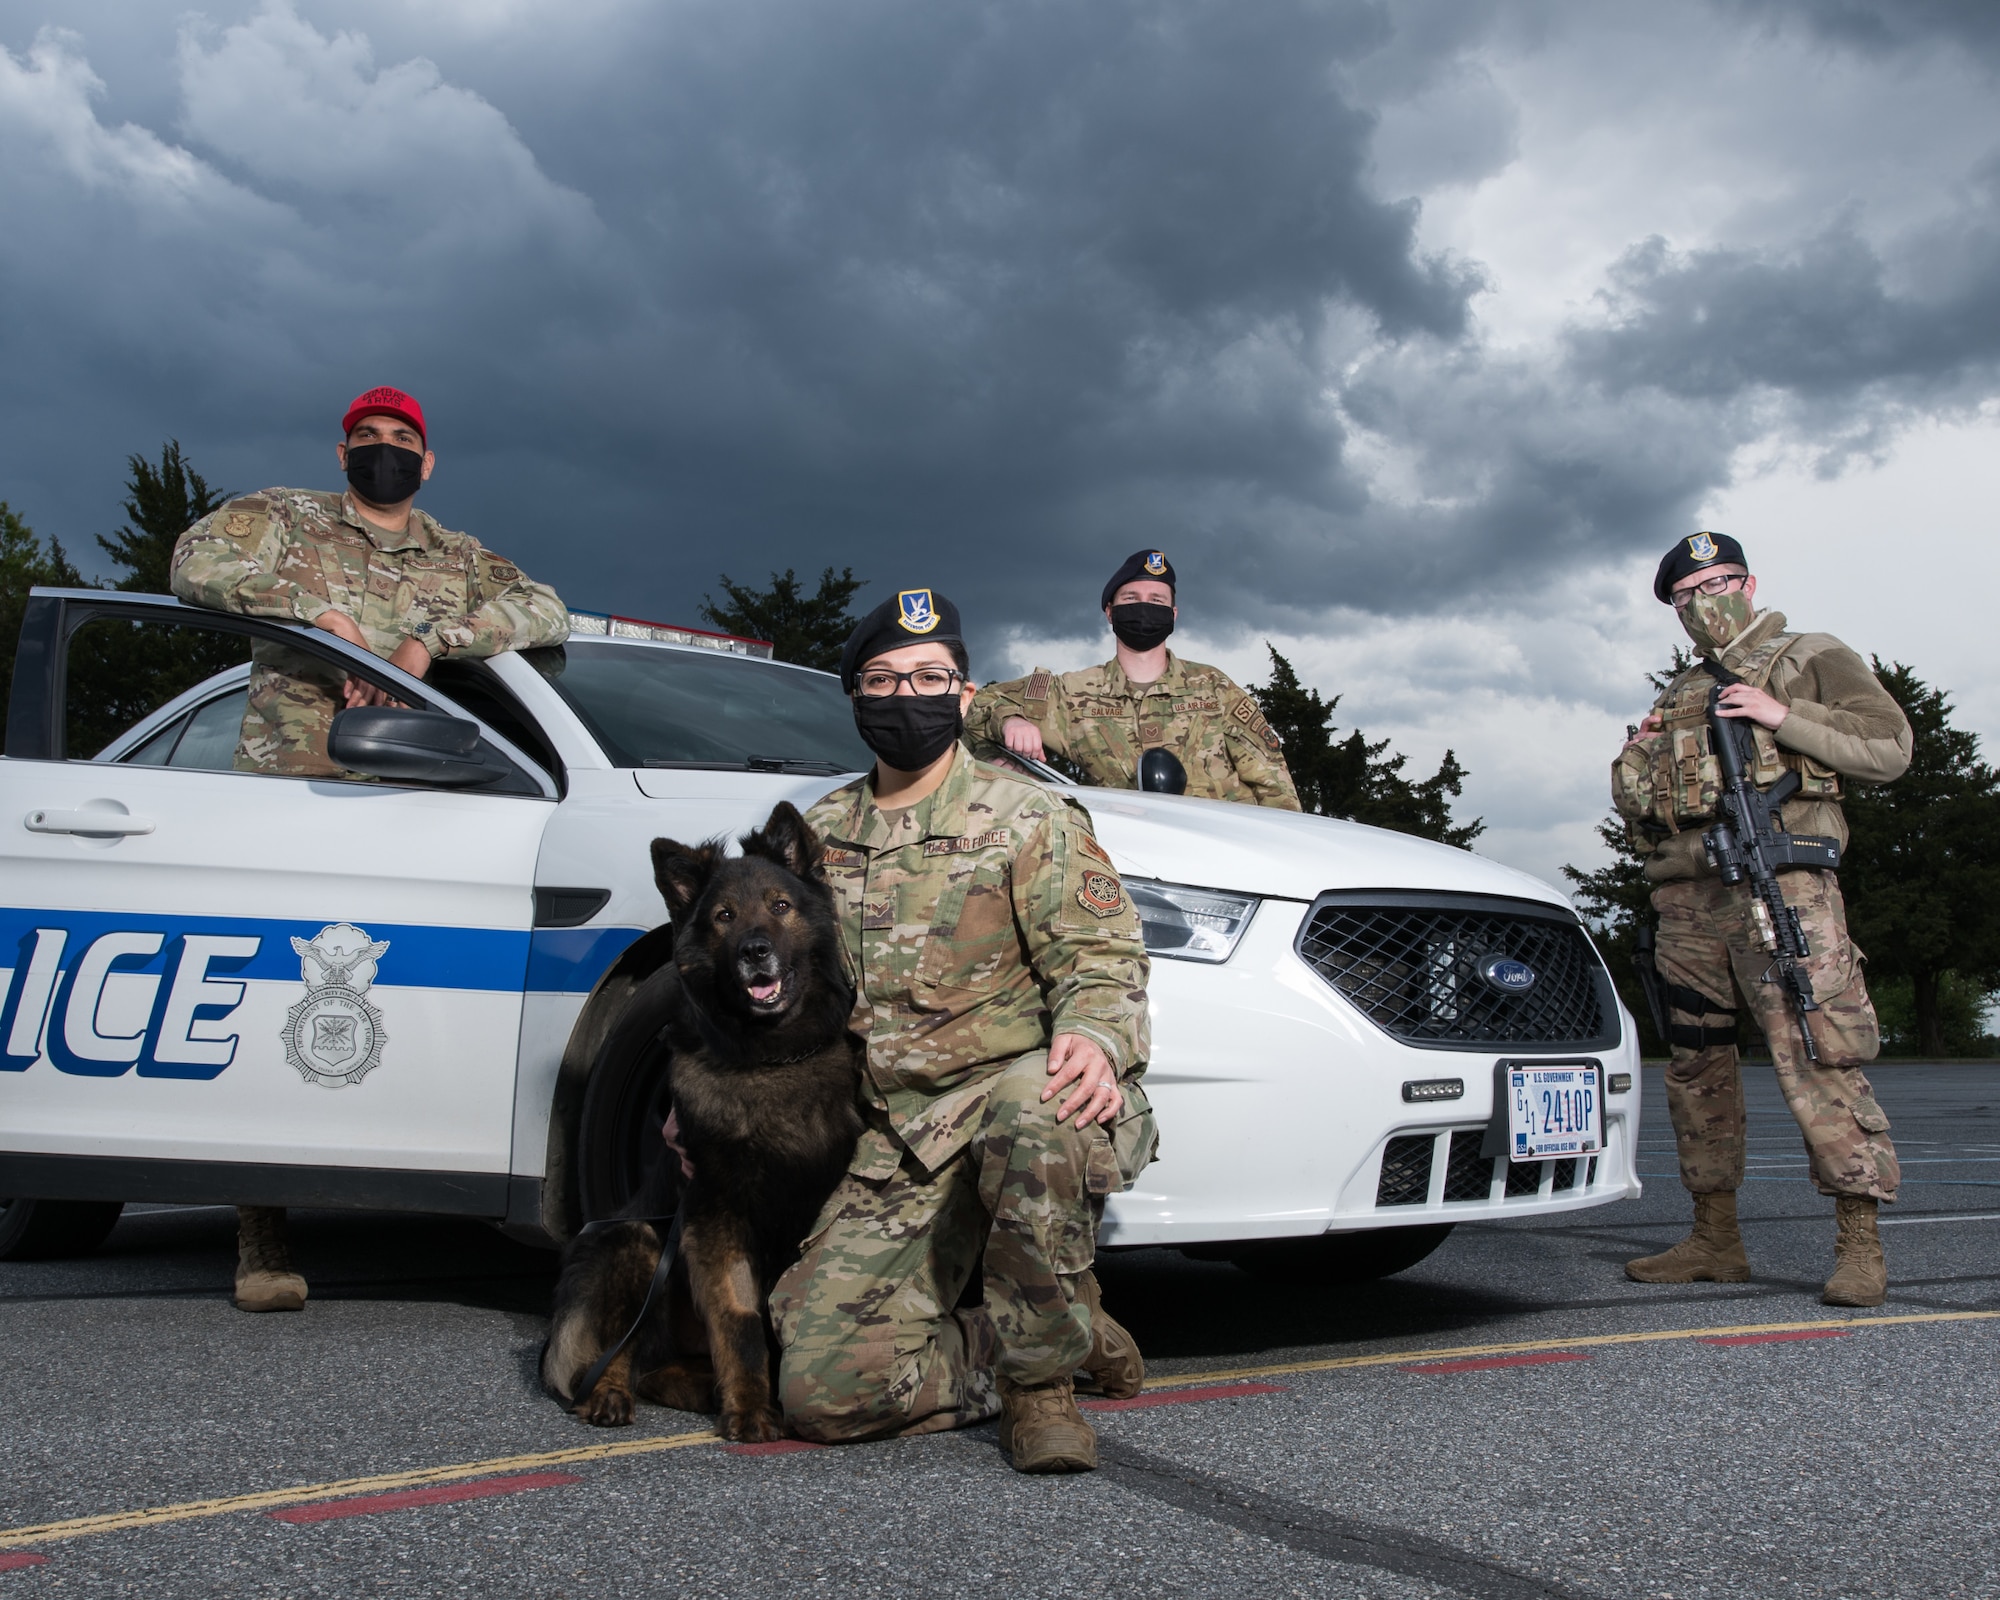 (From left) Staff Sgt. Jose Bracero-Camareno, 436th Security Forces Squadron combat arms instructor; Senior Airman Theresa Braack, 436th SFS military working dog handler with MWD Terry; Staff Sgt. Kirk Savage, 436th SFS Raven team leader and Senior Airman Ryan Claiborn, 436th SFS installation patrolman, stand next to a patrol vehicle May 8, 2020, at Dover Air Force Base, Delaware. The 436th SFS will host events for Police Week 2020 to honor fallen defenders. (U.S. Air Force photo by Mauricio Campino)